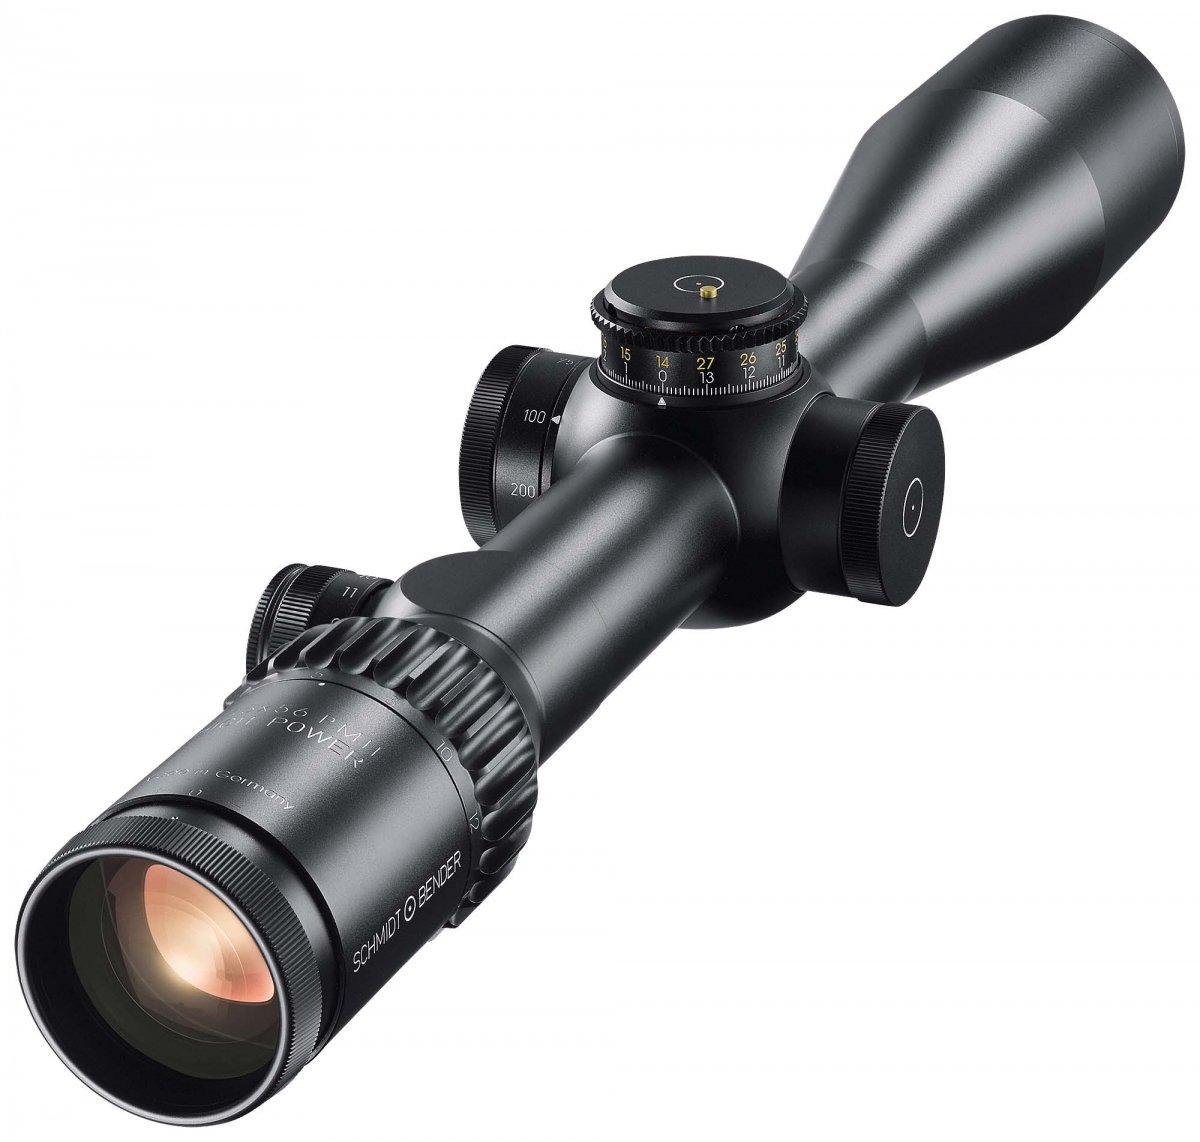 The new models add to a line of handmade riflescopes that are in use by military and Police forces in over 50 Countries and are a favourite of special operations forces